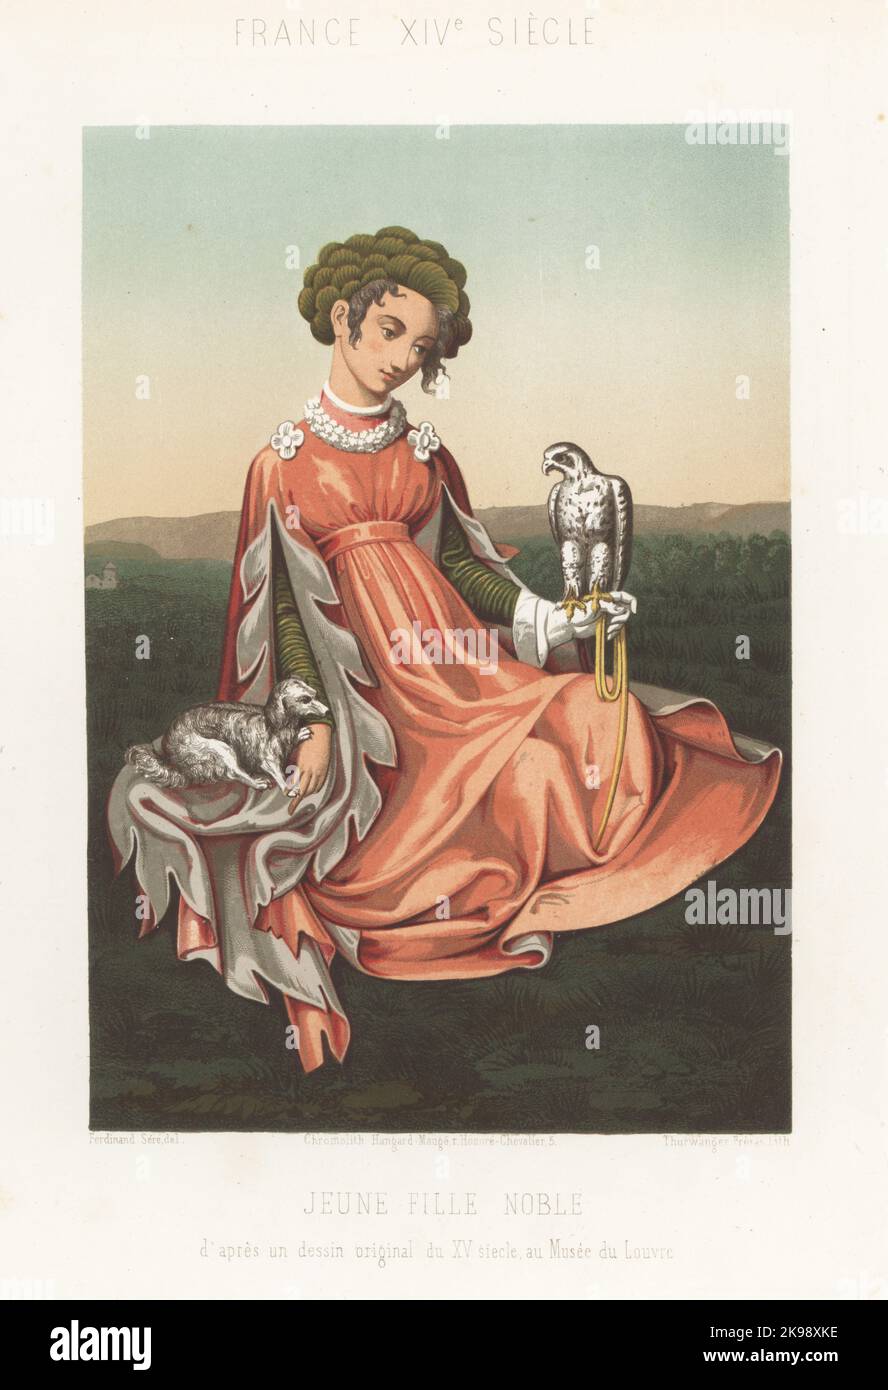 Young noble woman, France, 15th century. With lap dog and falcon. In gown with long slashed sleeves called angel sleeves or manches a l'ange. From an original dessin in the Louvre by an unknown artist. Jeune fille noble, France, XVe siecle. Chromolithograph by the Thurwanger brothers after an illustration by Ferdinand Sere from Charles Louandre’s Les Arts Somptuaires, The Sumptuary Arts, Hangard-Mauge, Paris, 1858. Stock Photo